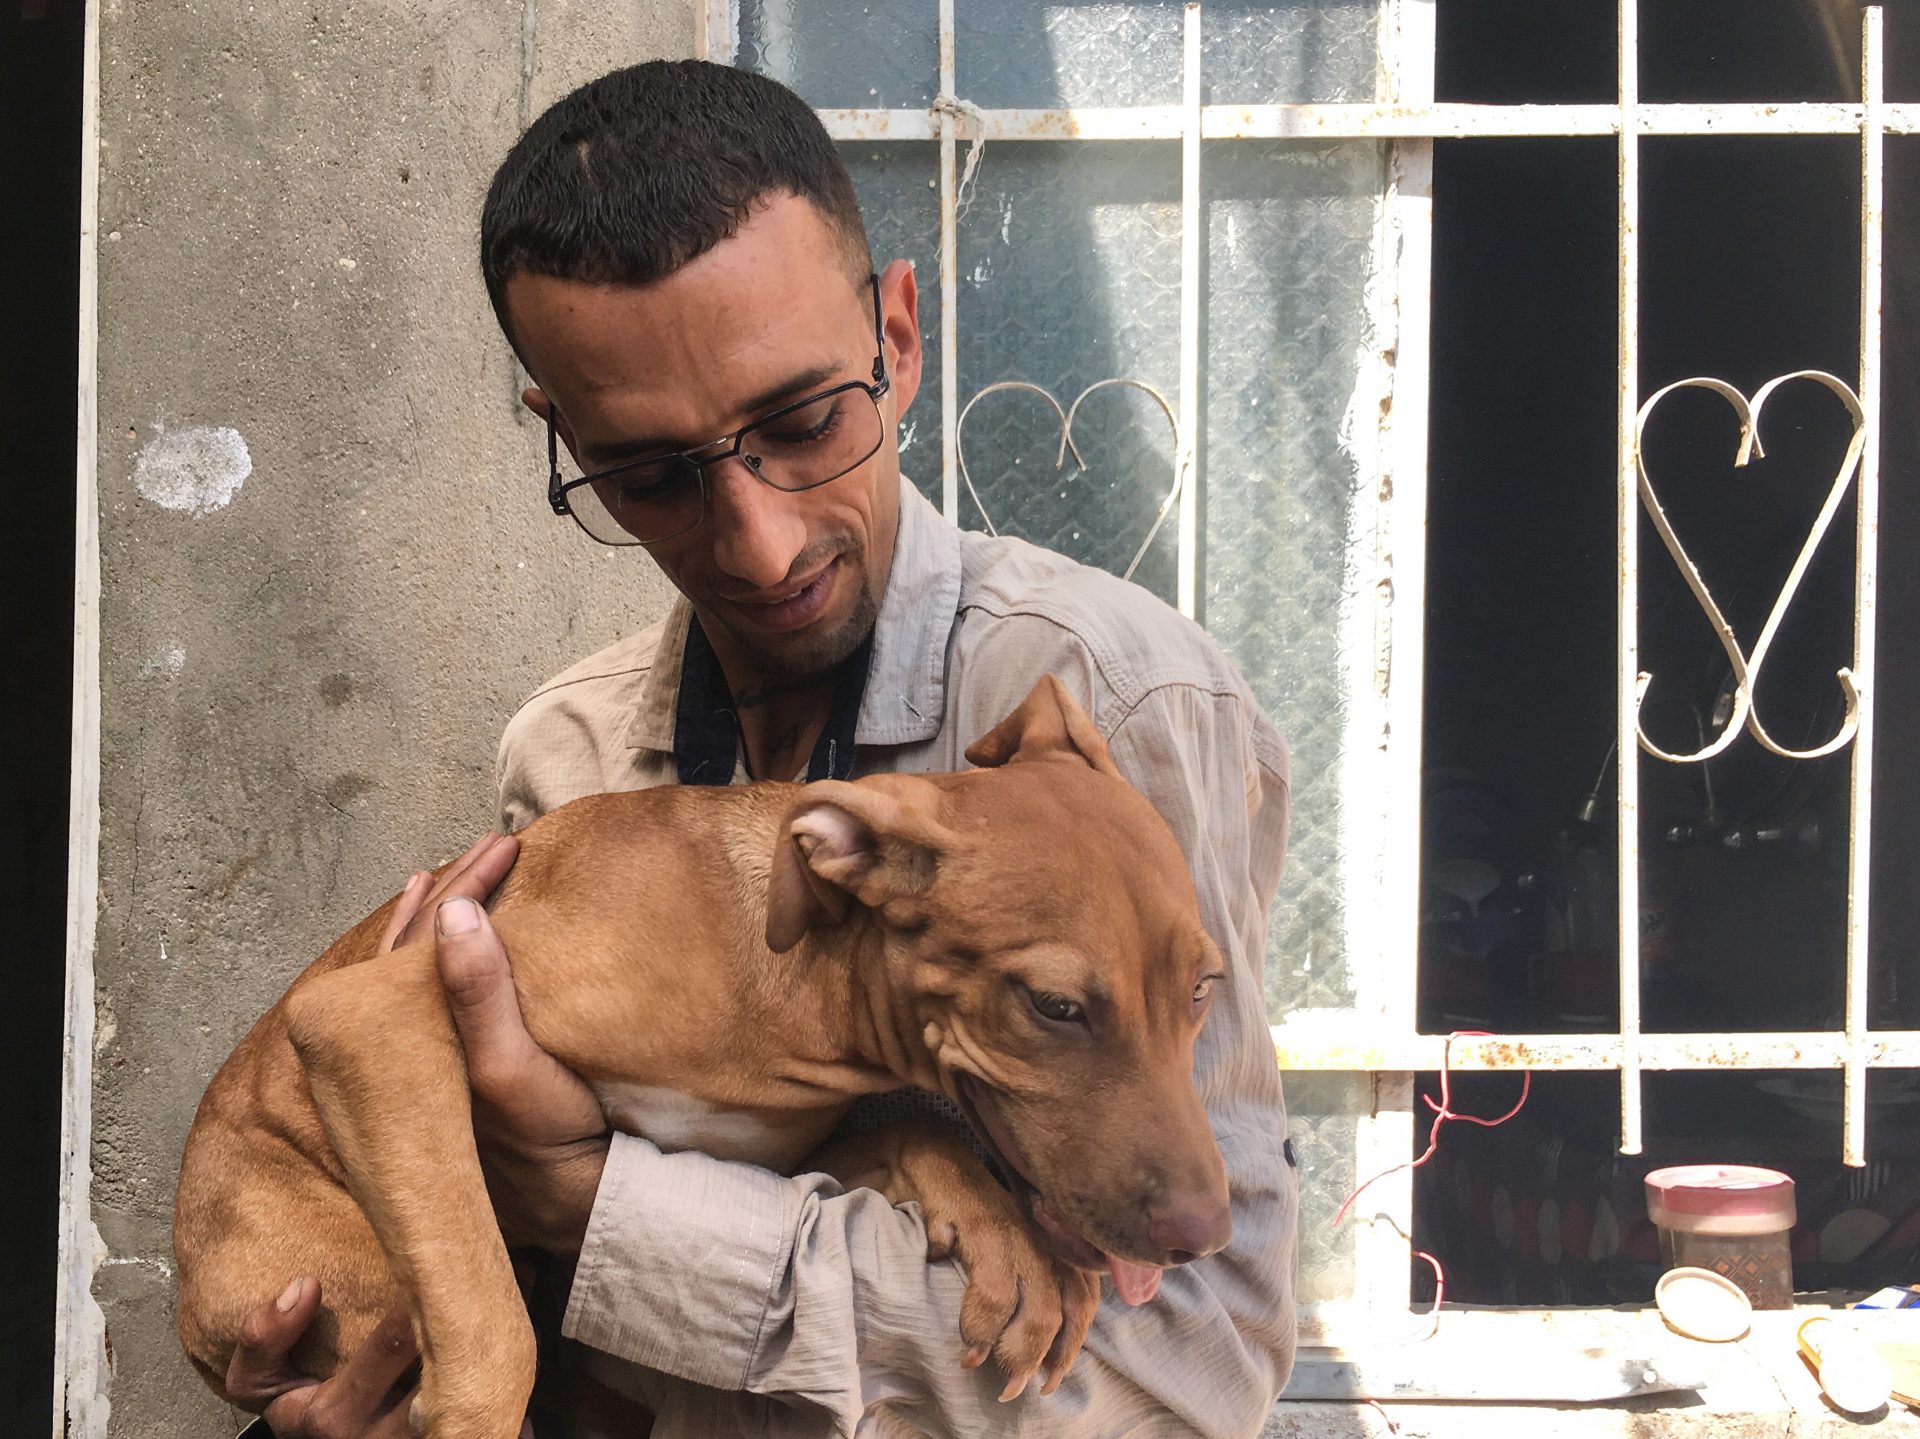 Naser al-Shimary cuddles his dog. "She is all the friends and family I have here," he says. Shimary says people in his neighborhood tell him dogs are religiously unclean. He is afraid she will be poisoned.